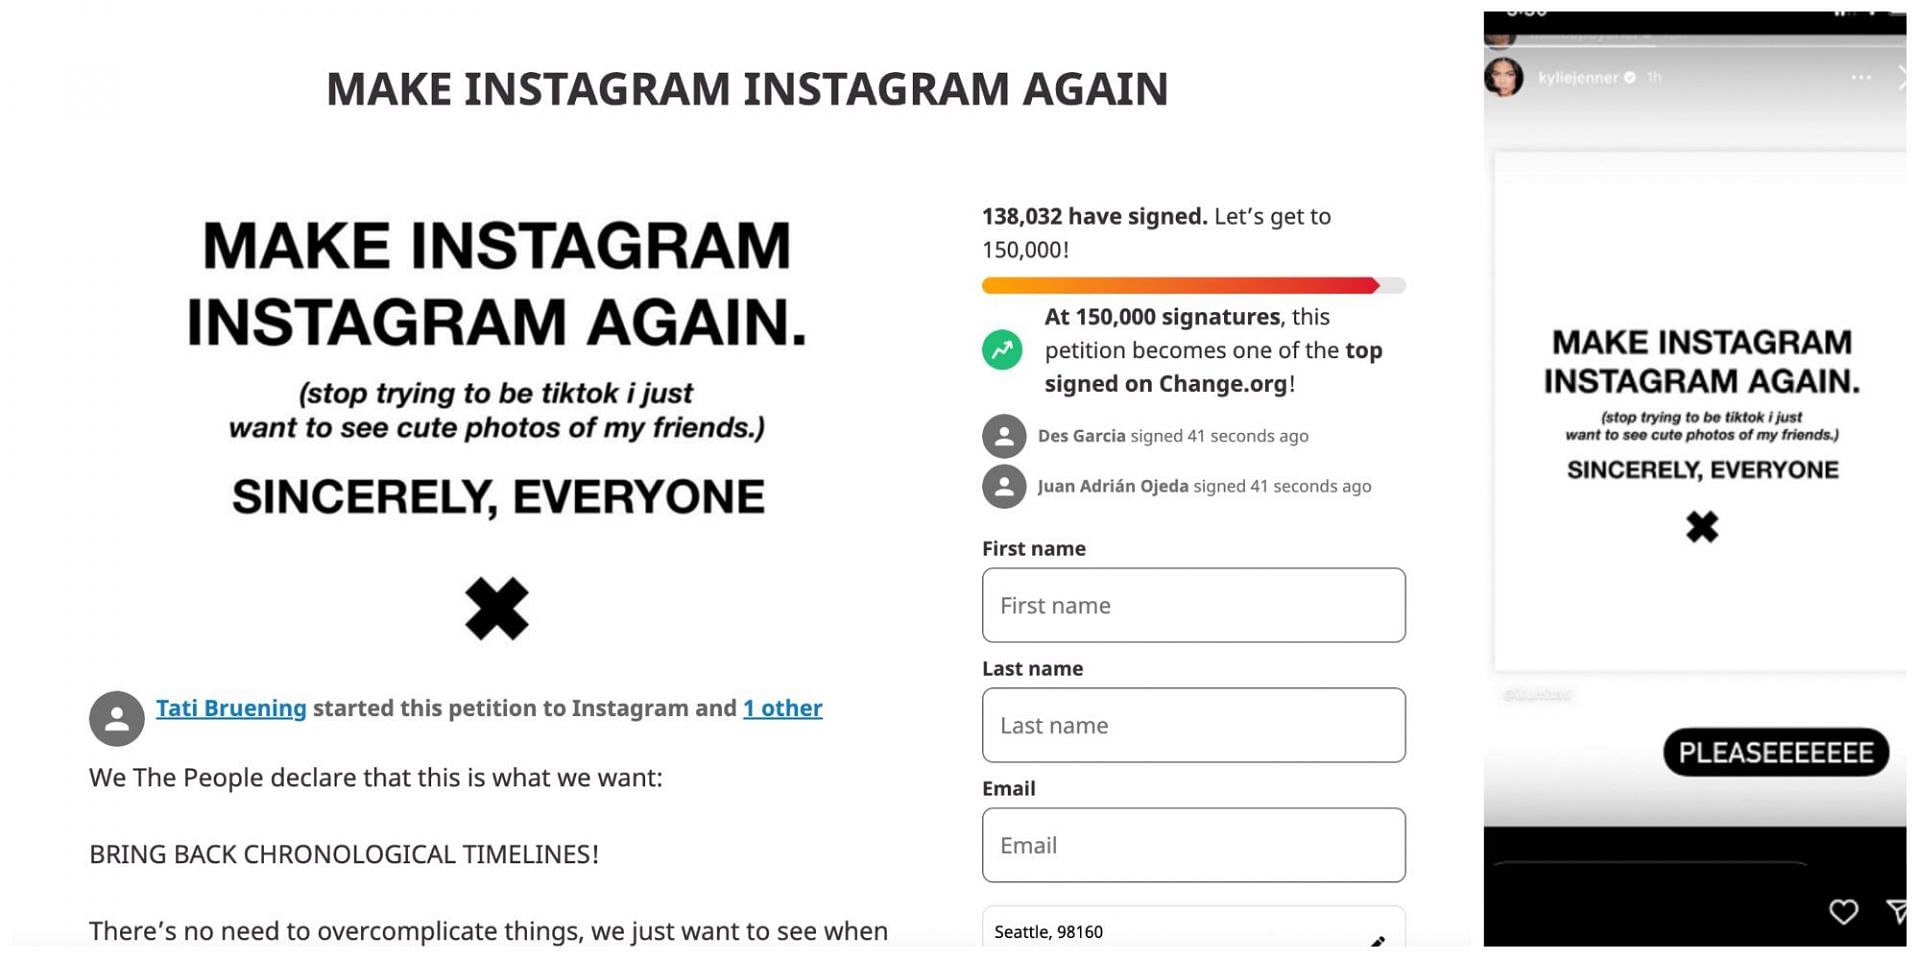 &quot;Make Instagram Instagram again&quot; trends on social media; Kylie Jenner also joins the movement. (Image via change.org)